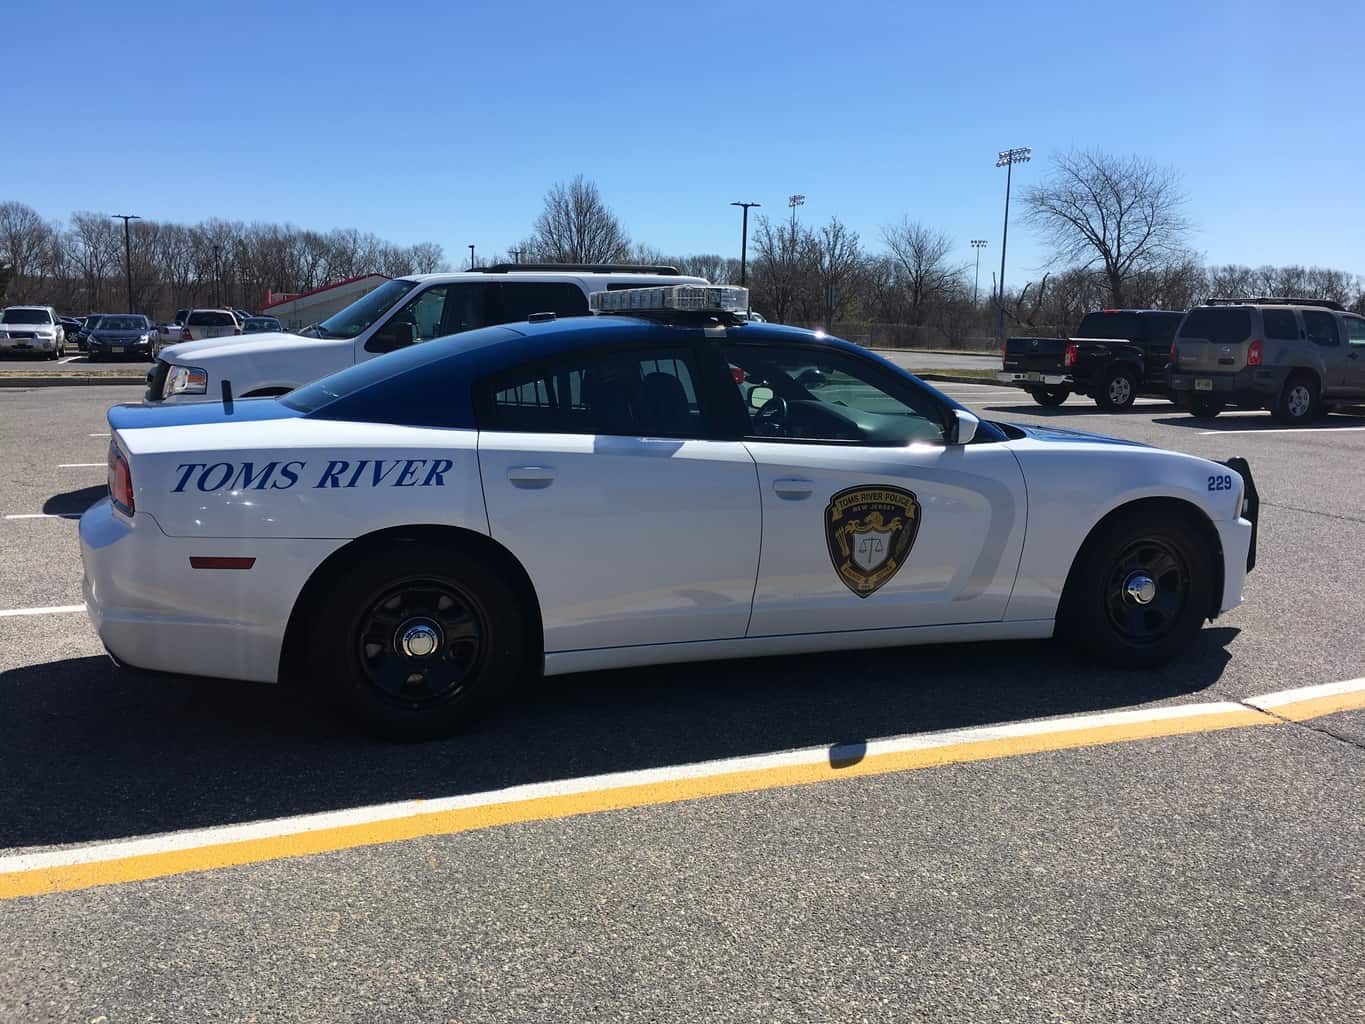 Armed Officers To Be In Every Toms River Township School